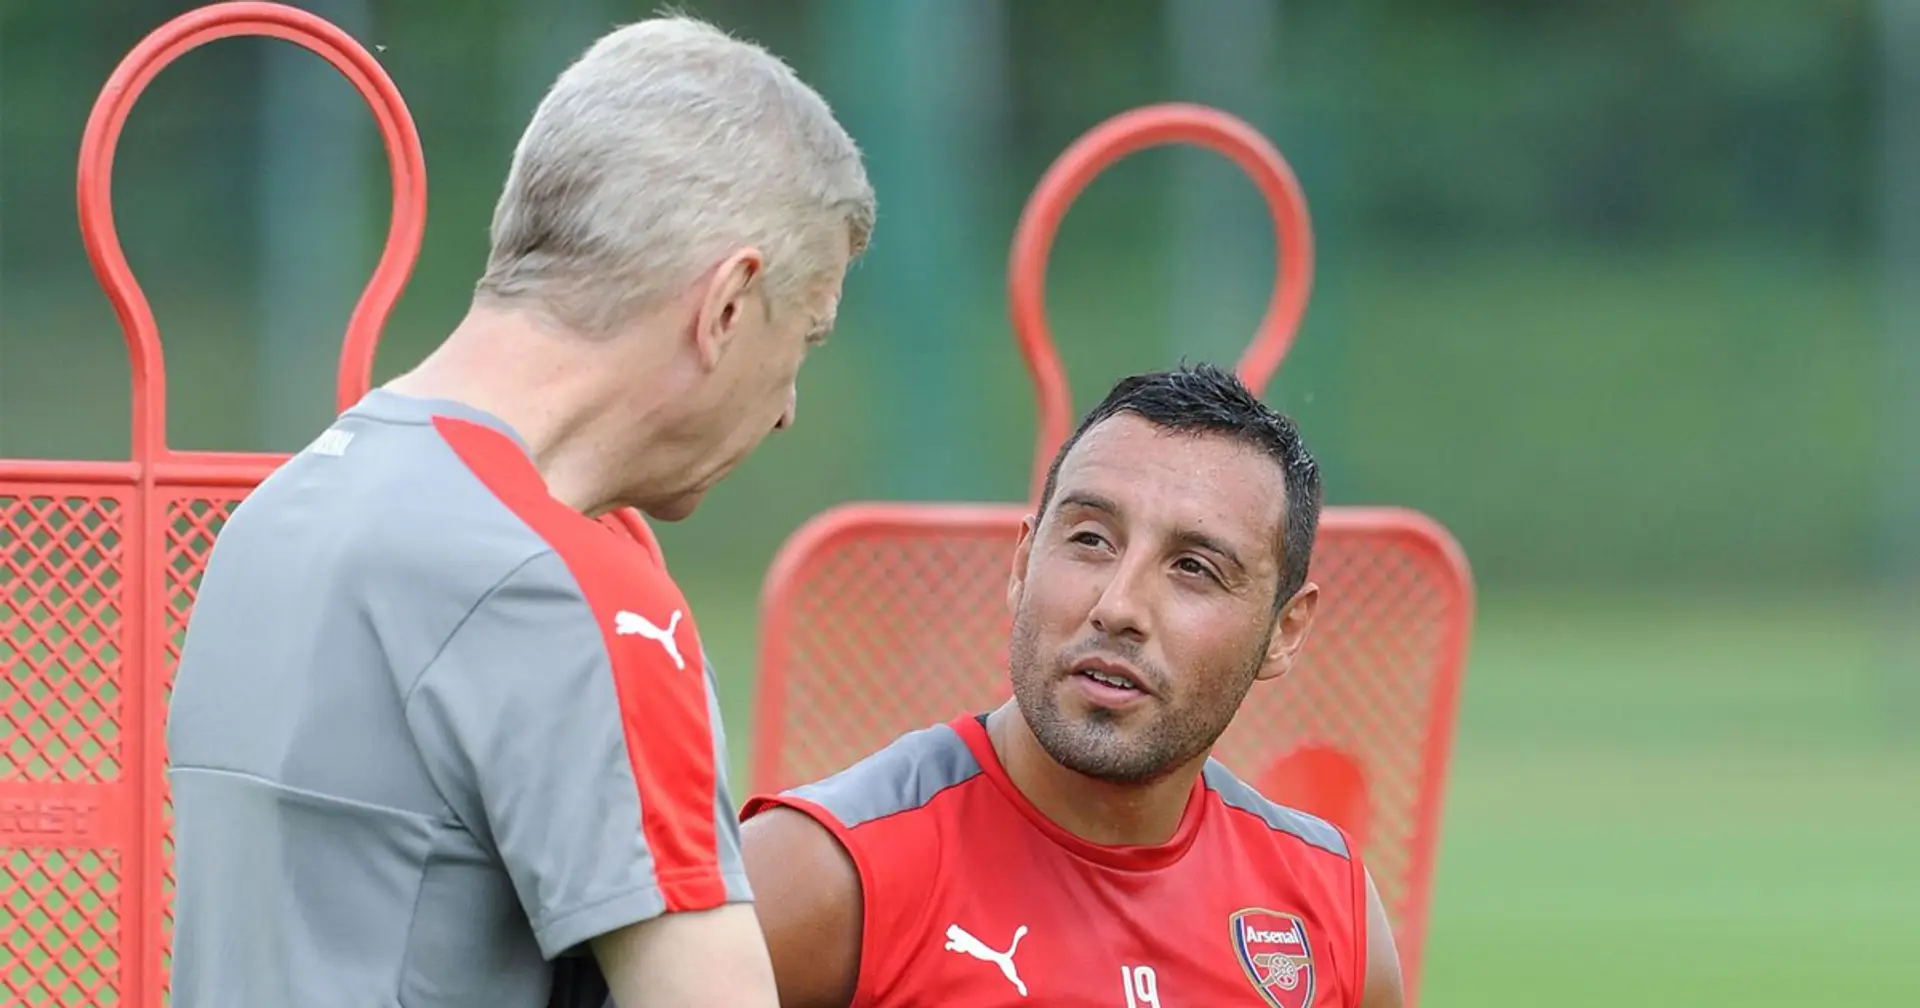 Cazorla is 'eternally grateful' to Arsene Wenger who renewed Santi's contract following numerous surgeries